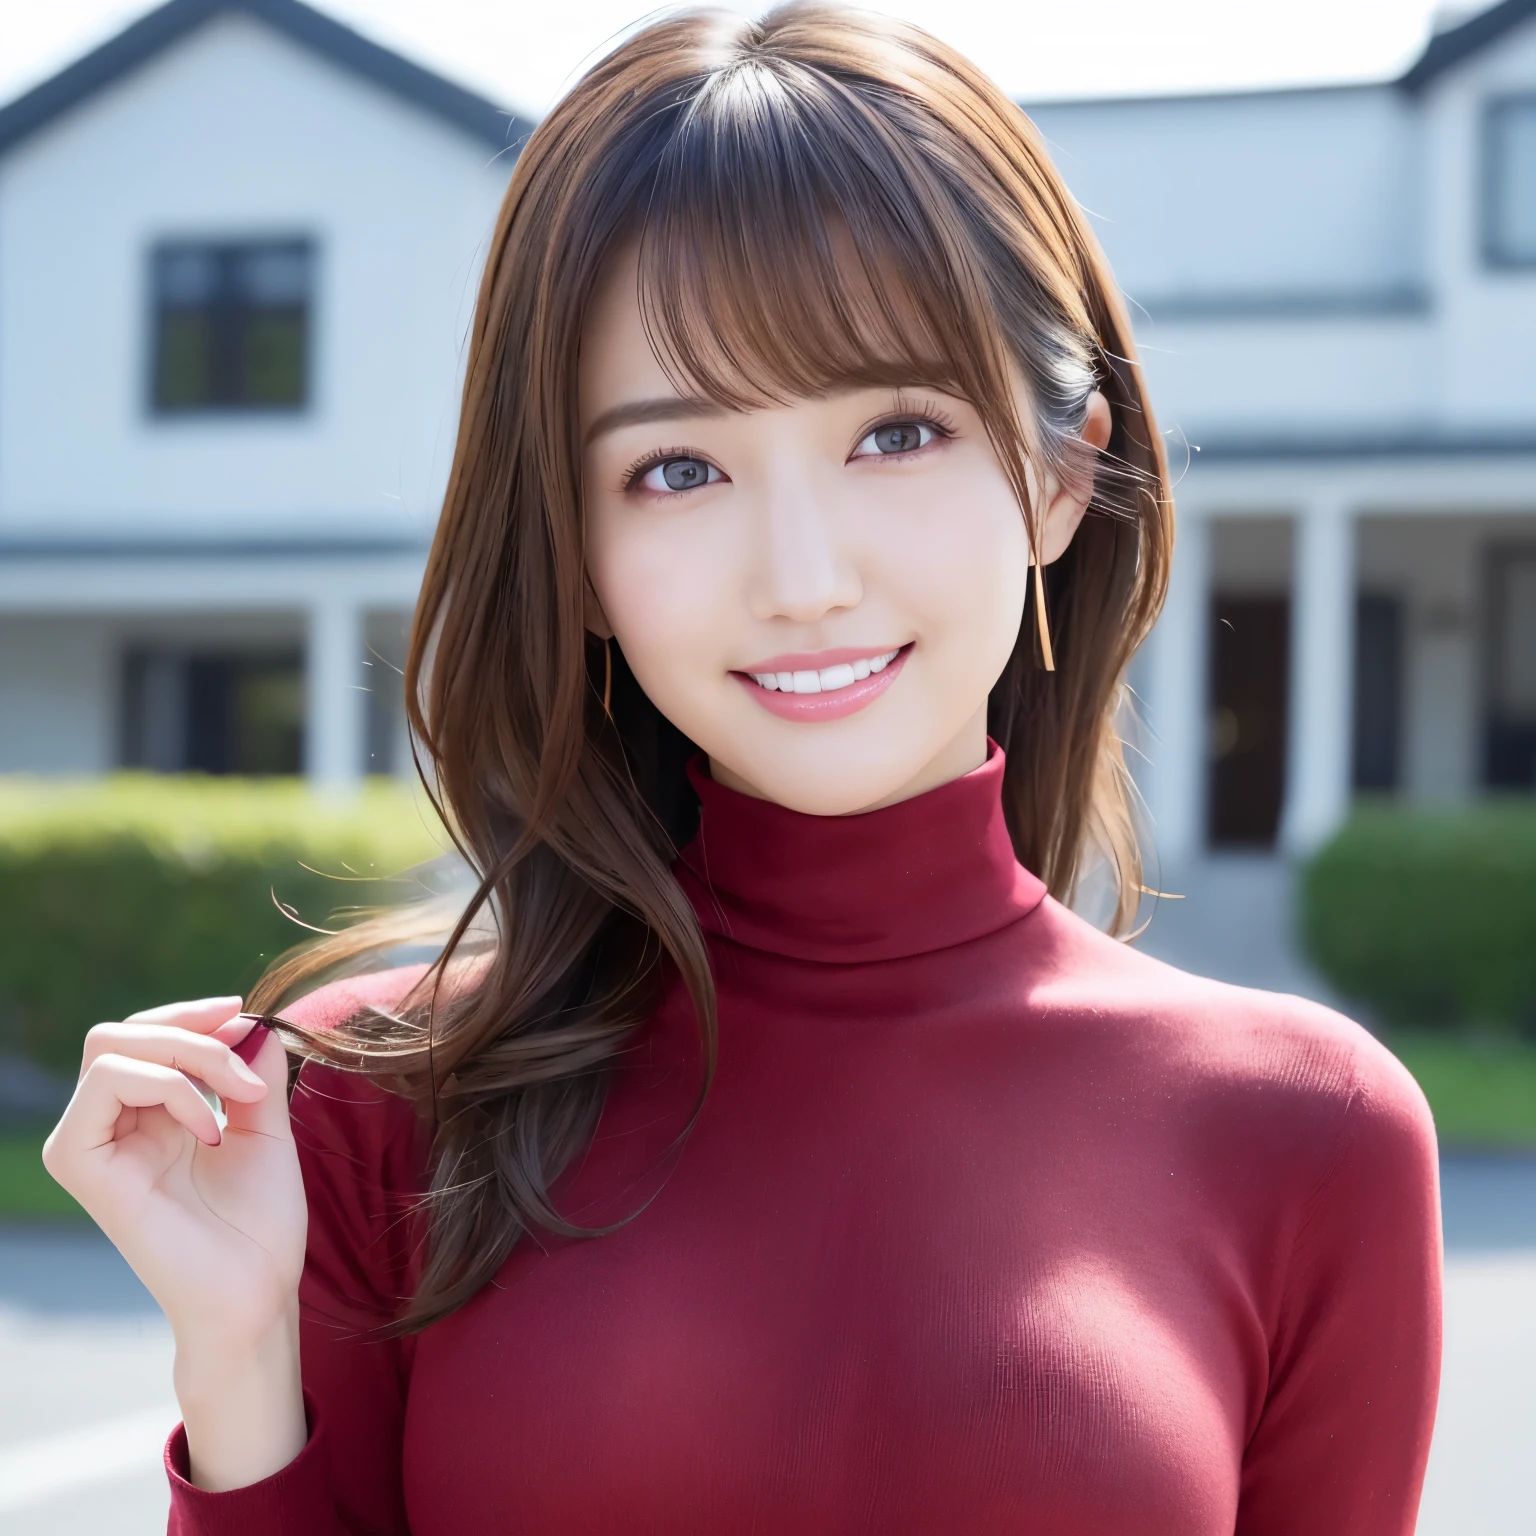 (highest quality、table top、8K、best image quality、Award-winning work)、one beautiful woman、25 years old、(Fixed front configuration:1.1)、(Close-up of face from the front:1.1)、(big and full breasts:1.1)、(emphasize body line:1.1)、(Perfect dark red turtleneck tight knit sweater:1.3)、look at me and smile、(Strongly blurred new house background:1.1)、natural makeup、With bangs、long hair、Ultra high definition beauty face、(Super high resolution perfect beautiful perfect teeth:1.2)、ultra high definition hair、(Super high-definition sparkling eyes:1.1)、Super high resolution glossy lips、accurate anatomy、(very bright and vivid:1.3)